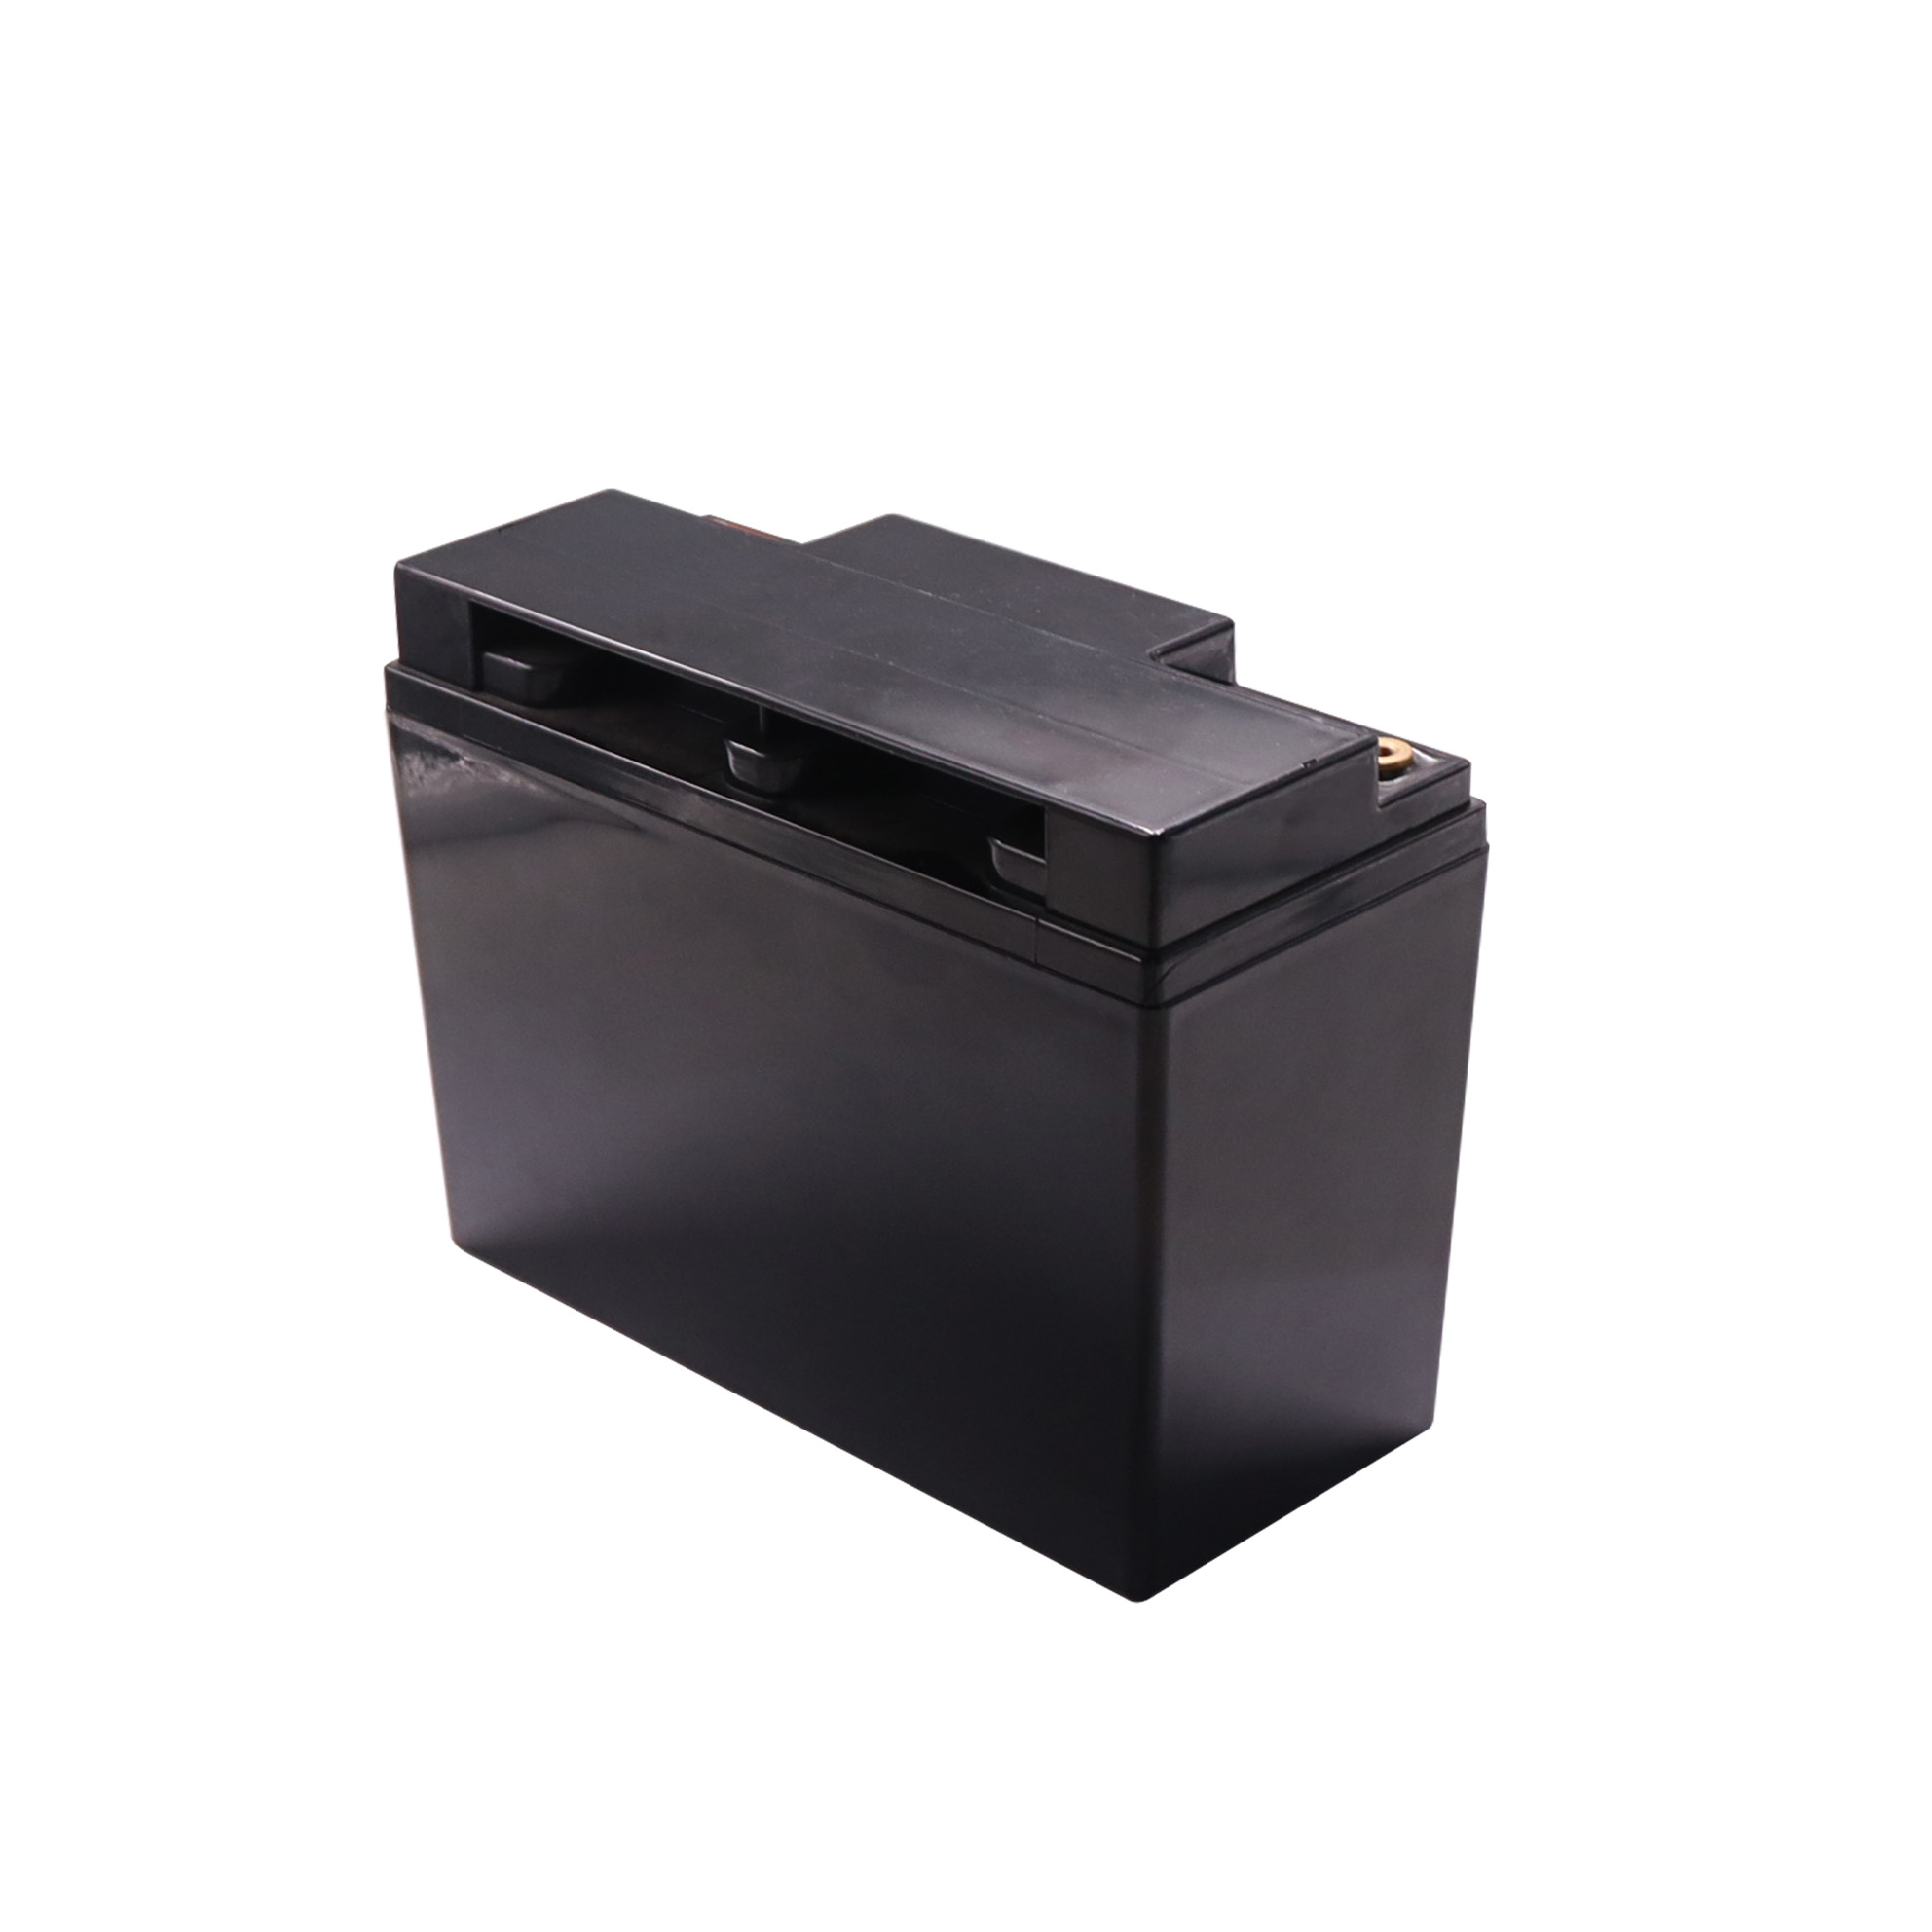 lithium 100Ah storage battery for golf carts